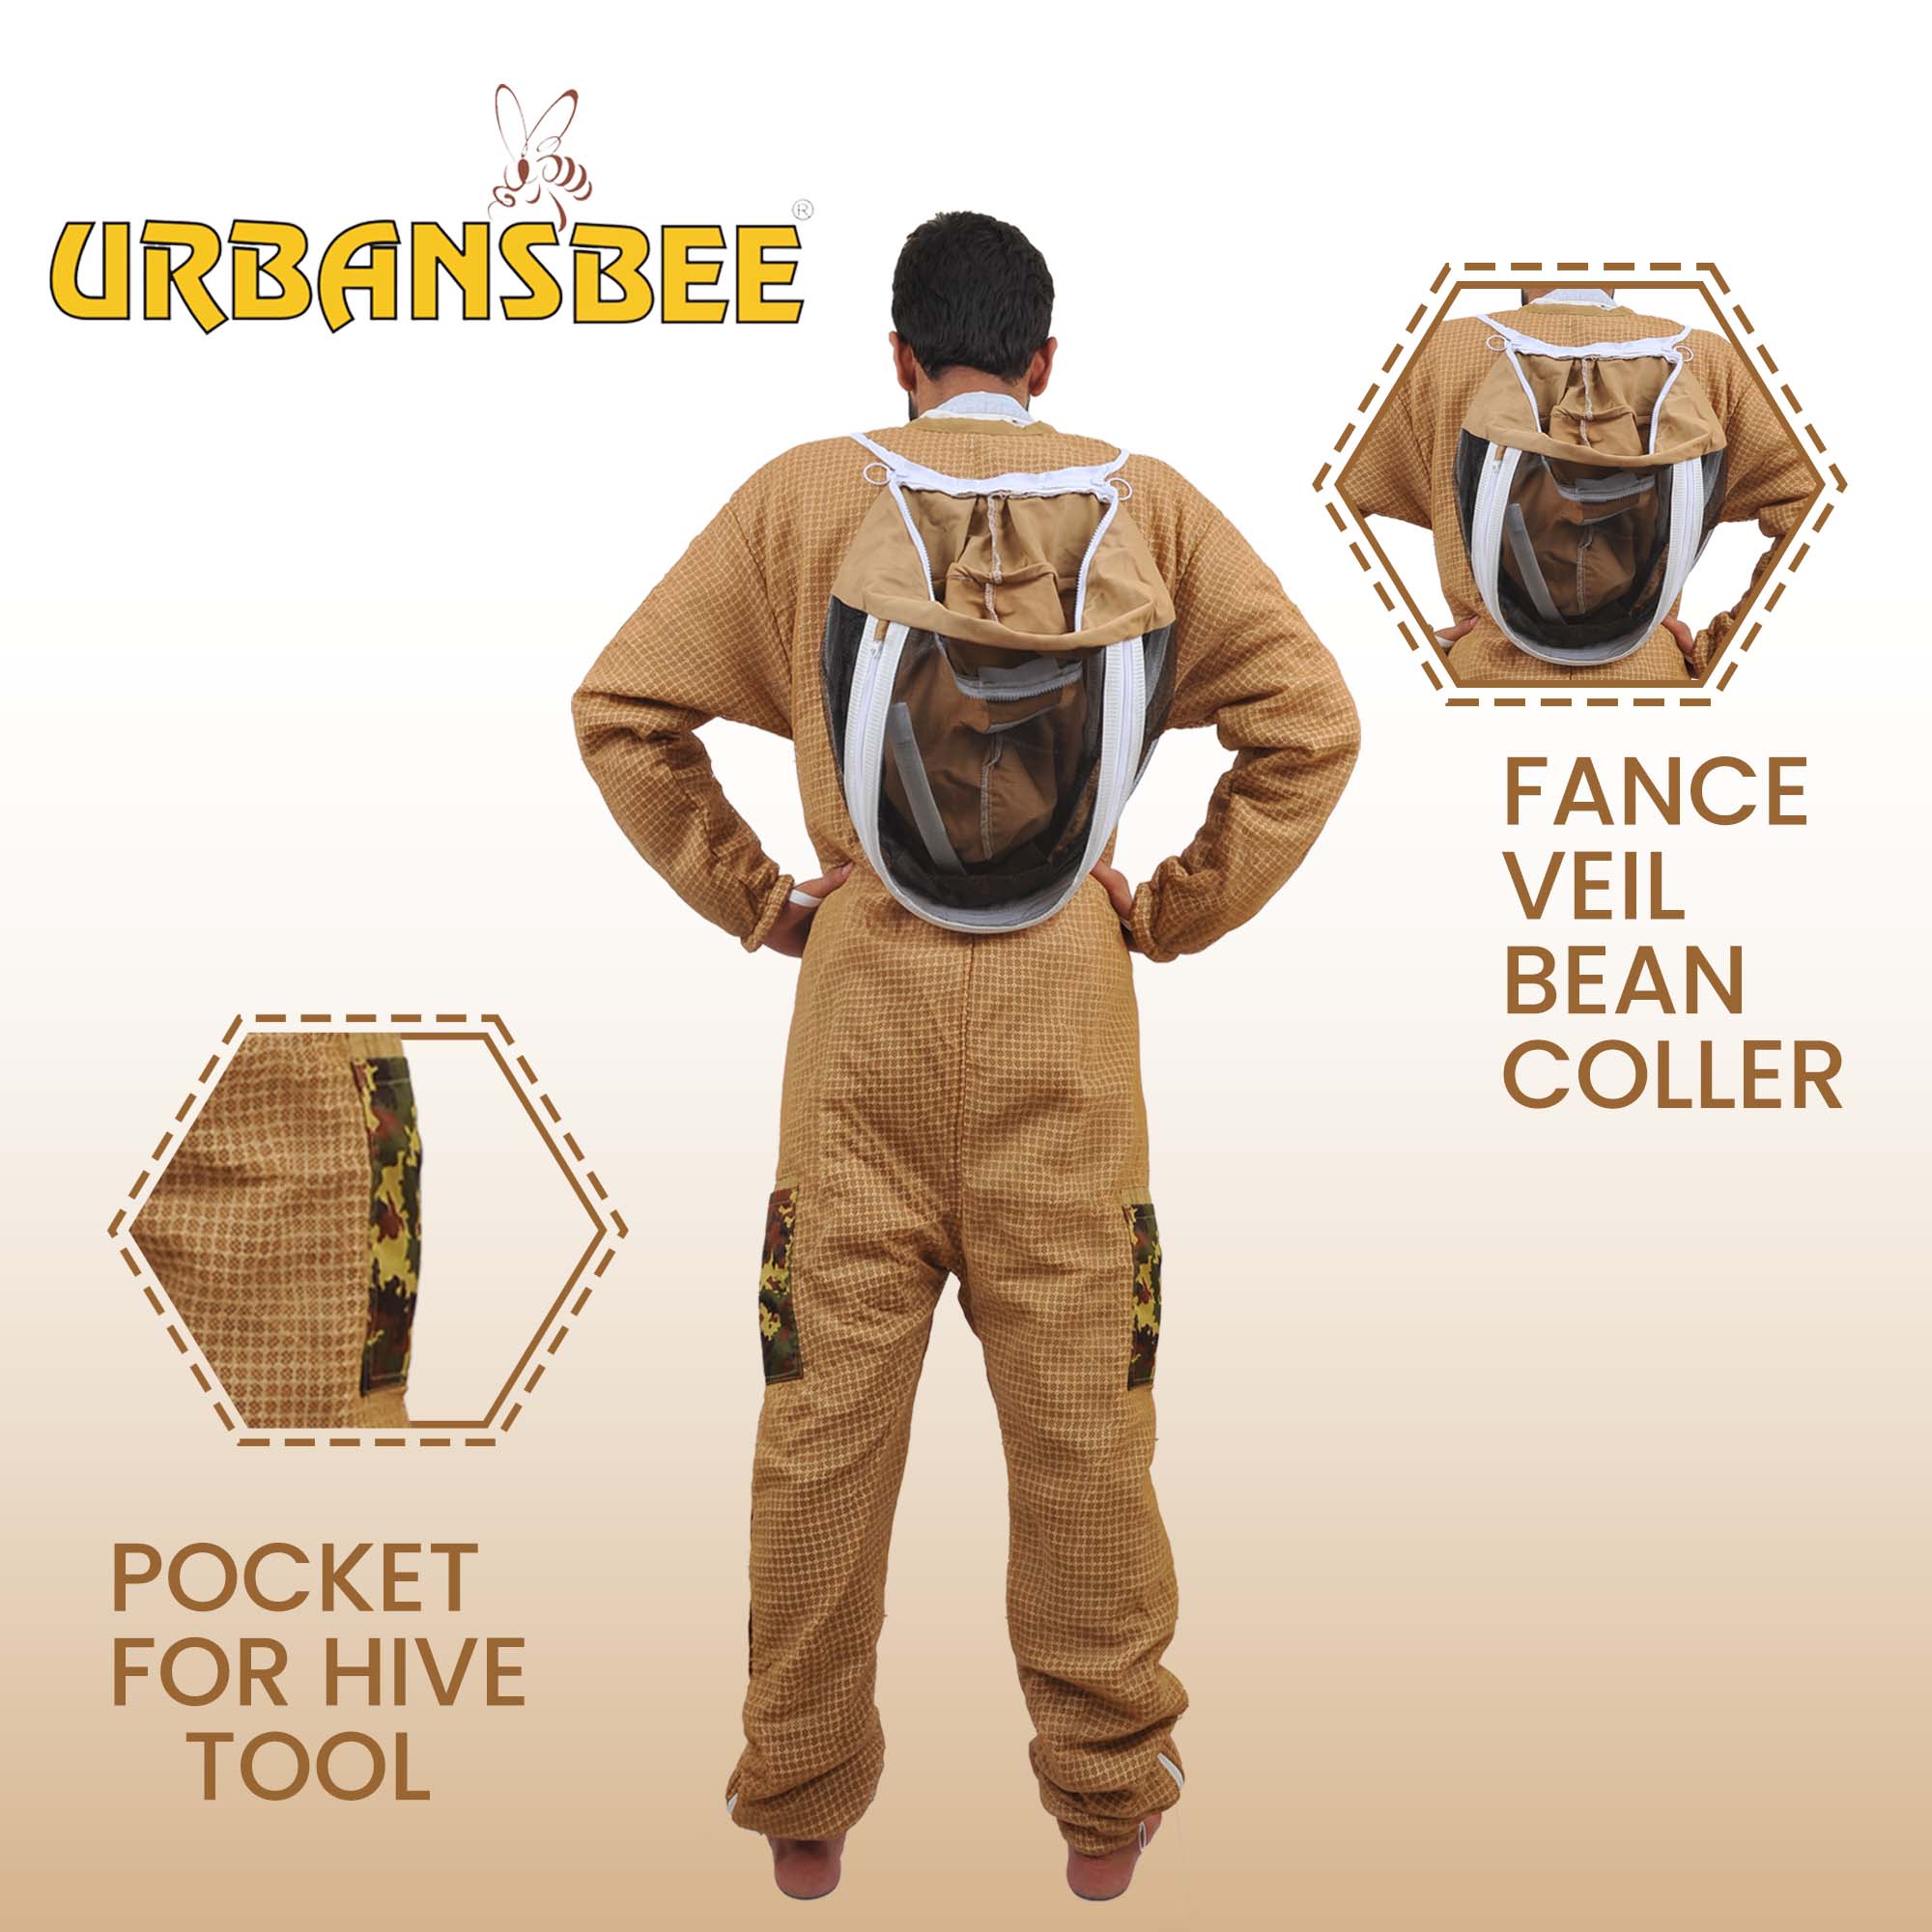 Beekeeping suit 3 layers ventilated anti-sting for bees with round veil